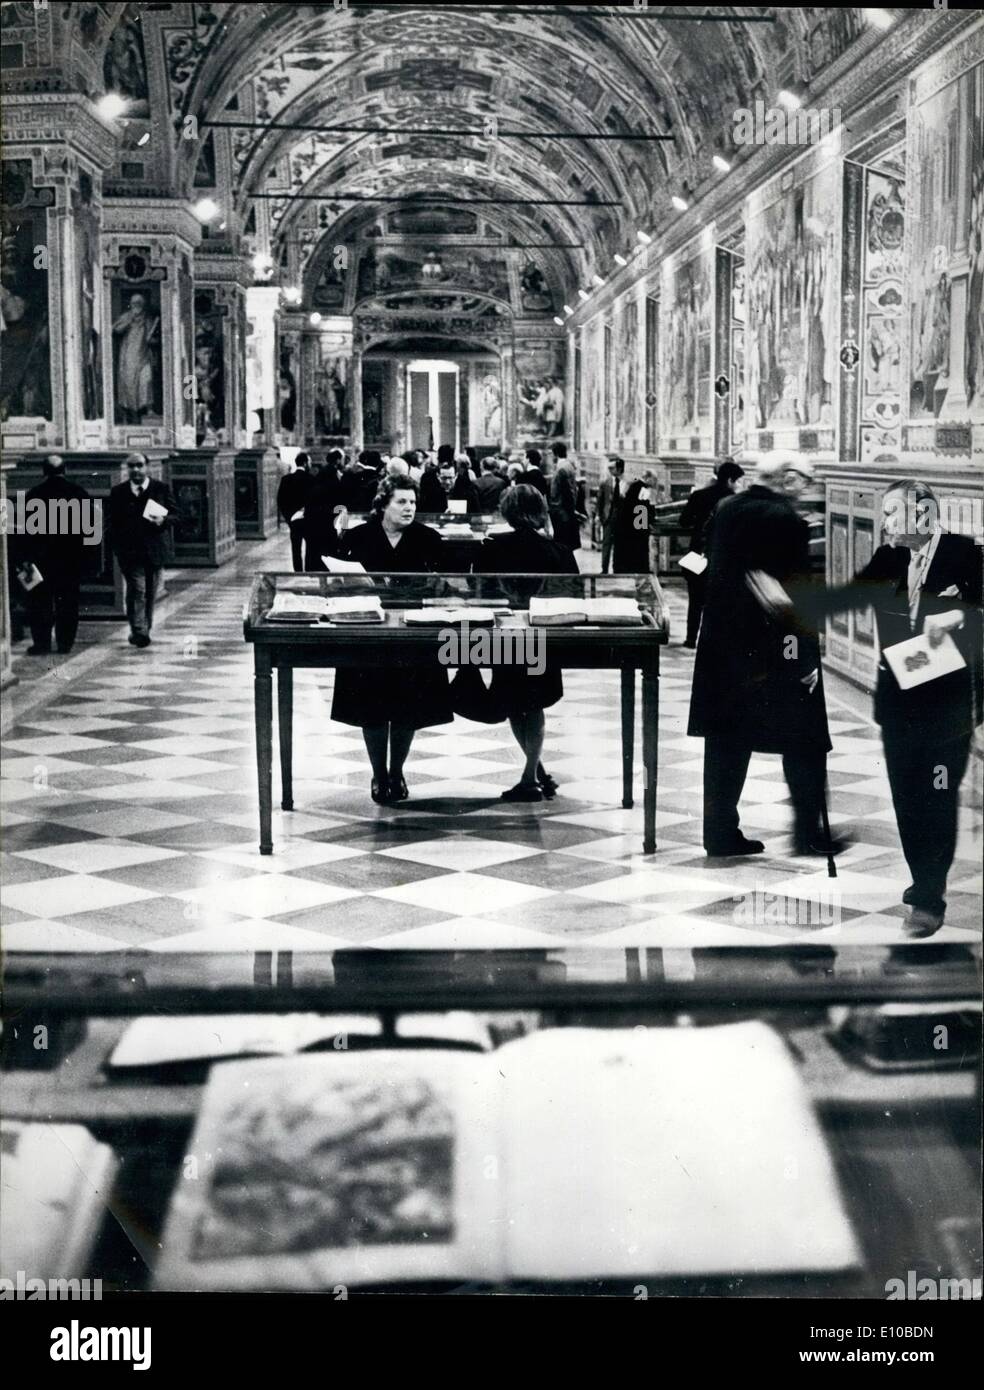 Mar. 03, 1972 - Pope opens exhibition of Priceless manuscripts: Pope Paul recently opened a unique exhibition of priceless manuscripts and fragments of the Bible in the frescoed Sistine Hall of the Vatican. The show will stay open to the public for one year to mark 1972 as the ''Year of the Book'' as proclaimed by UNESCO. The exhibition includes Bibles all all the centuries from the third century on. Besides the manuscripts, ti will also show the most valuable printed editions Stock Photo